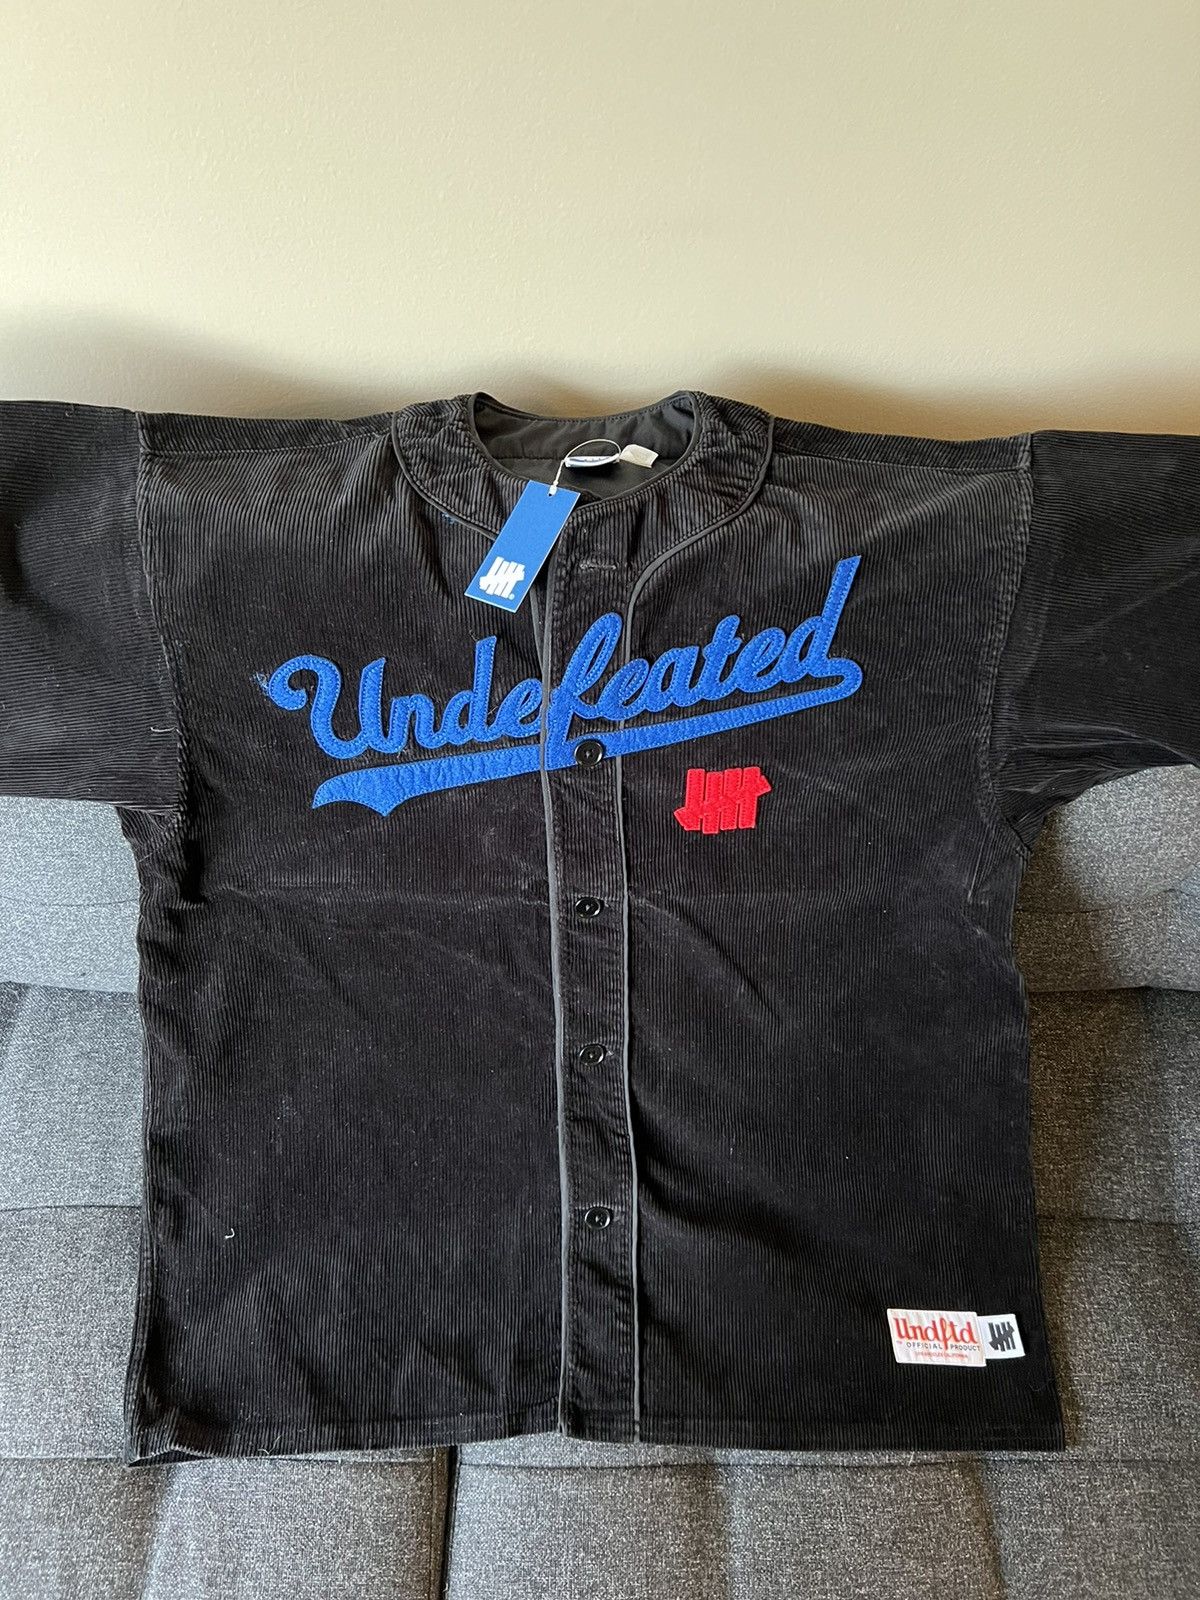 Undefeated Undefeated Corduroy S/S Baseball Jersey | Grailed